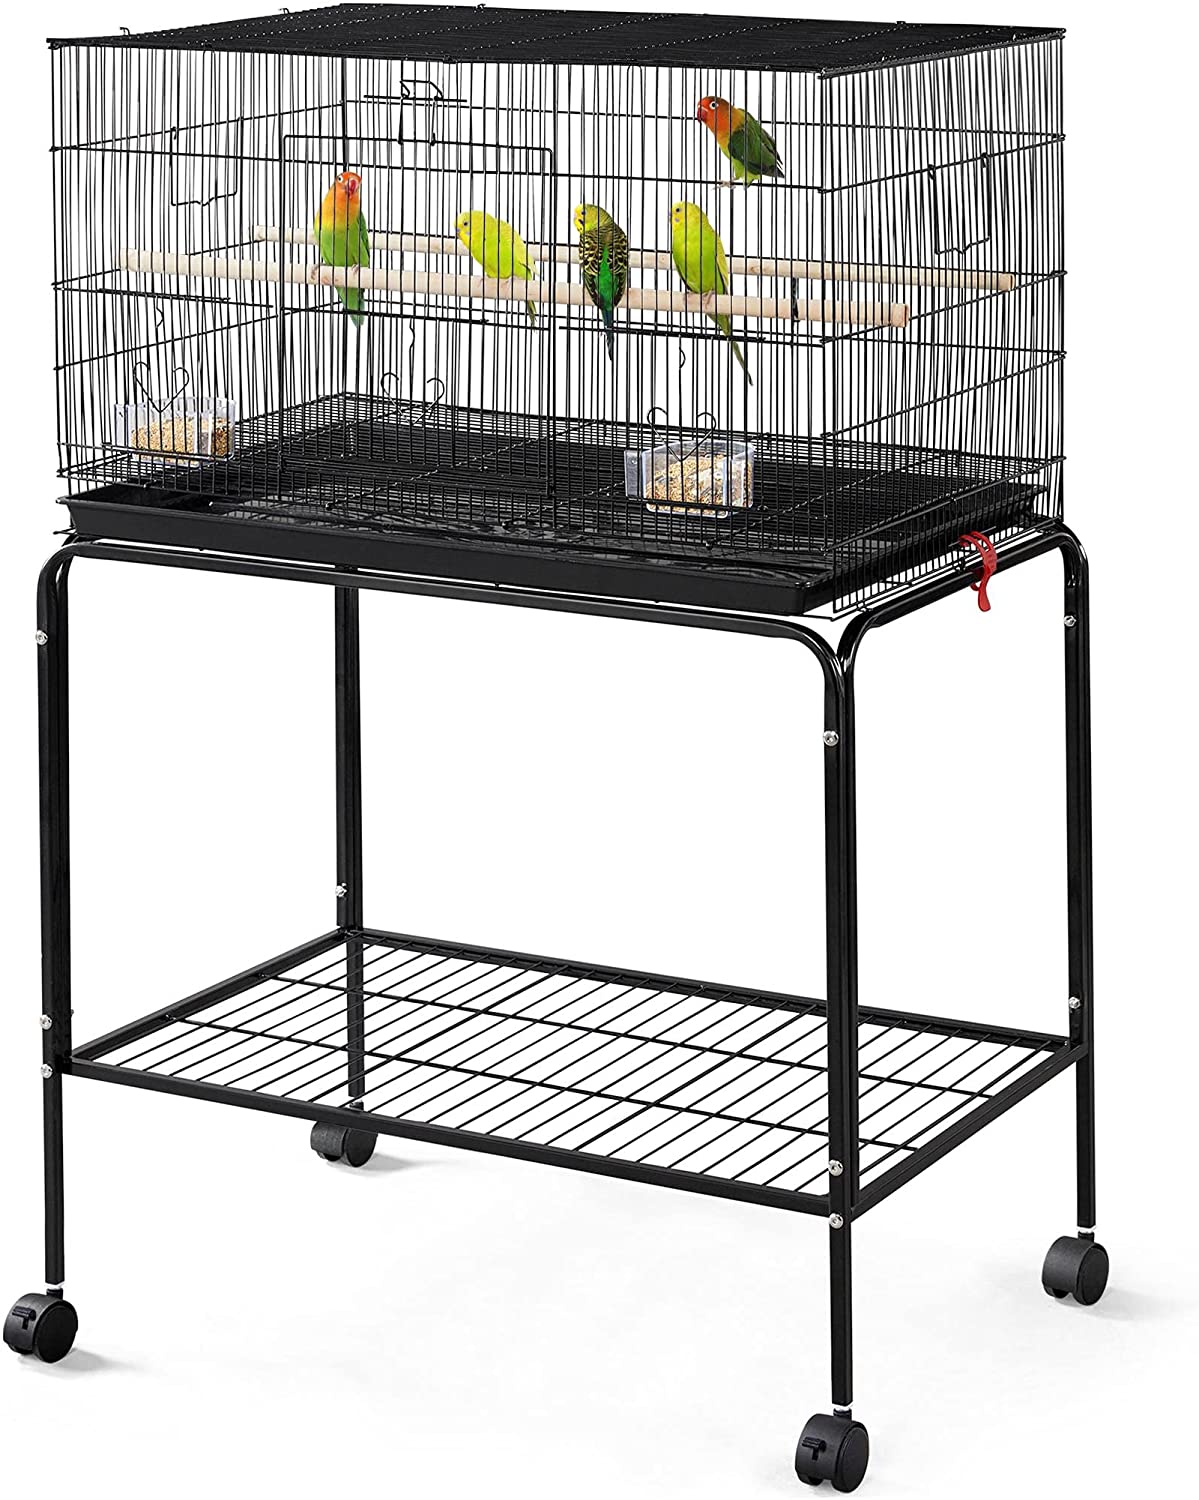 Review of Yaheetech Flight Bird Cages